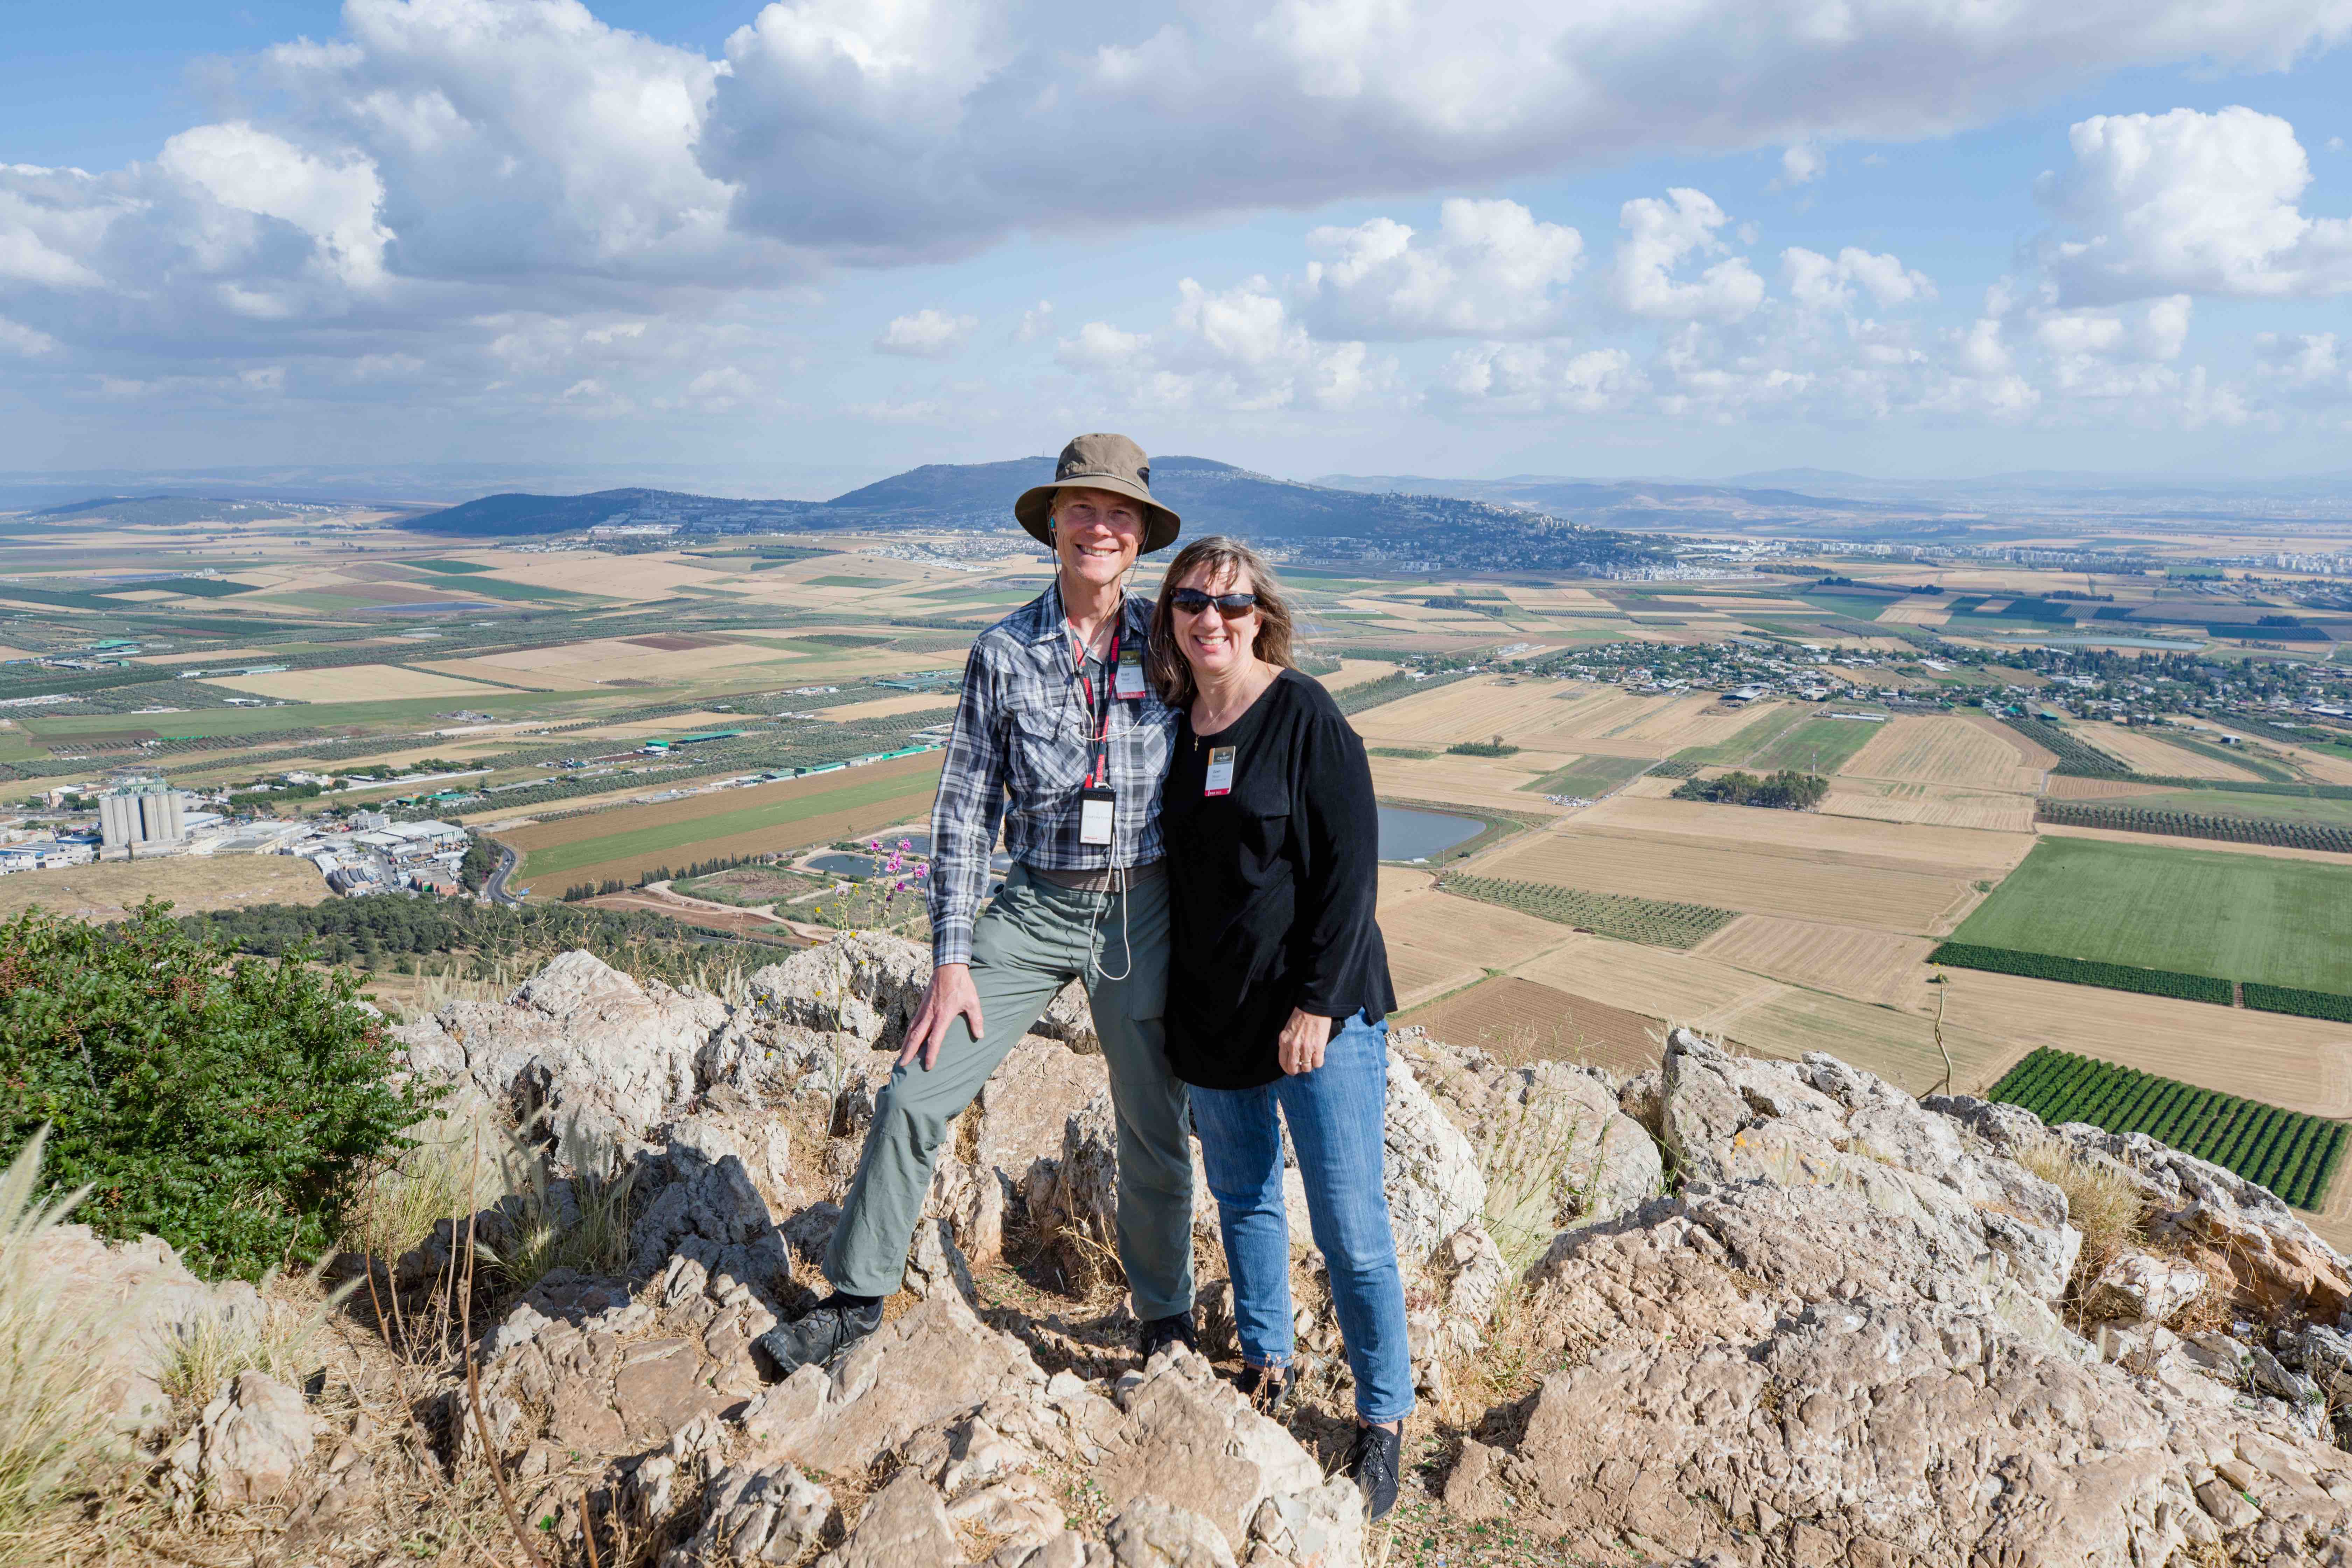 Two travelers standing together with Jezreel Valley in the background